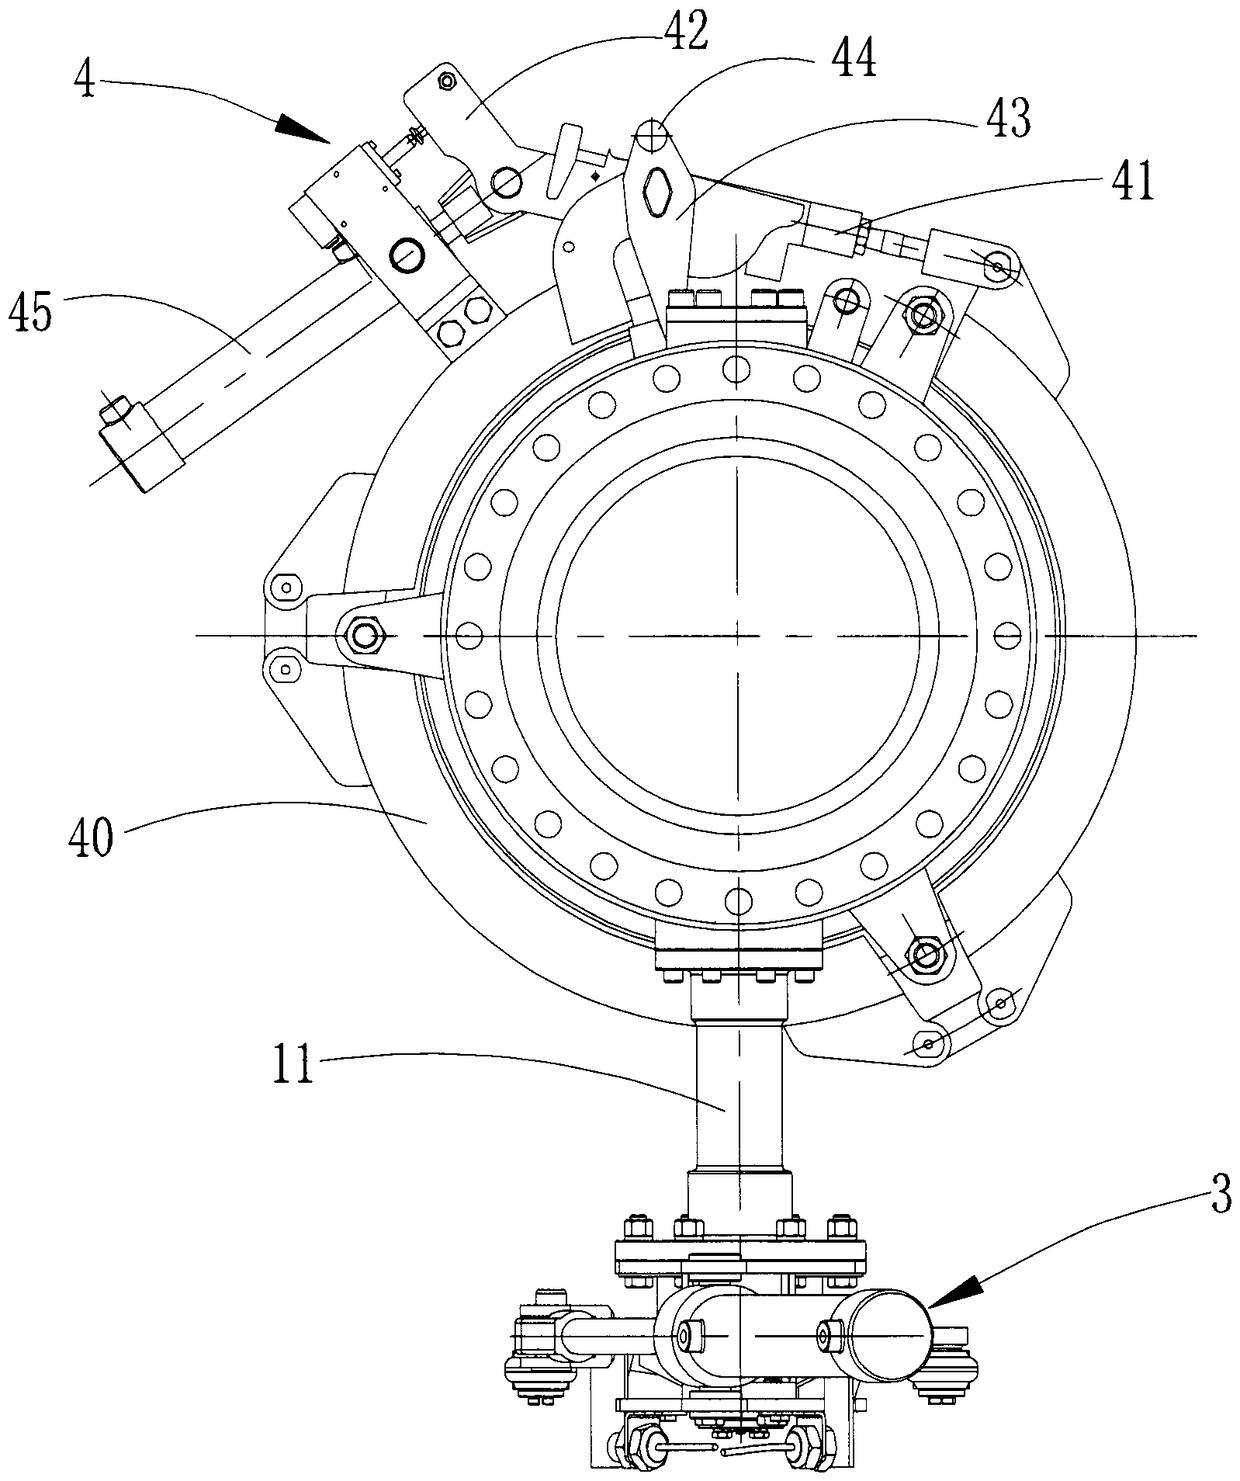 Emergency release device for ultra-low temperature fluid handling equipment